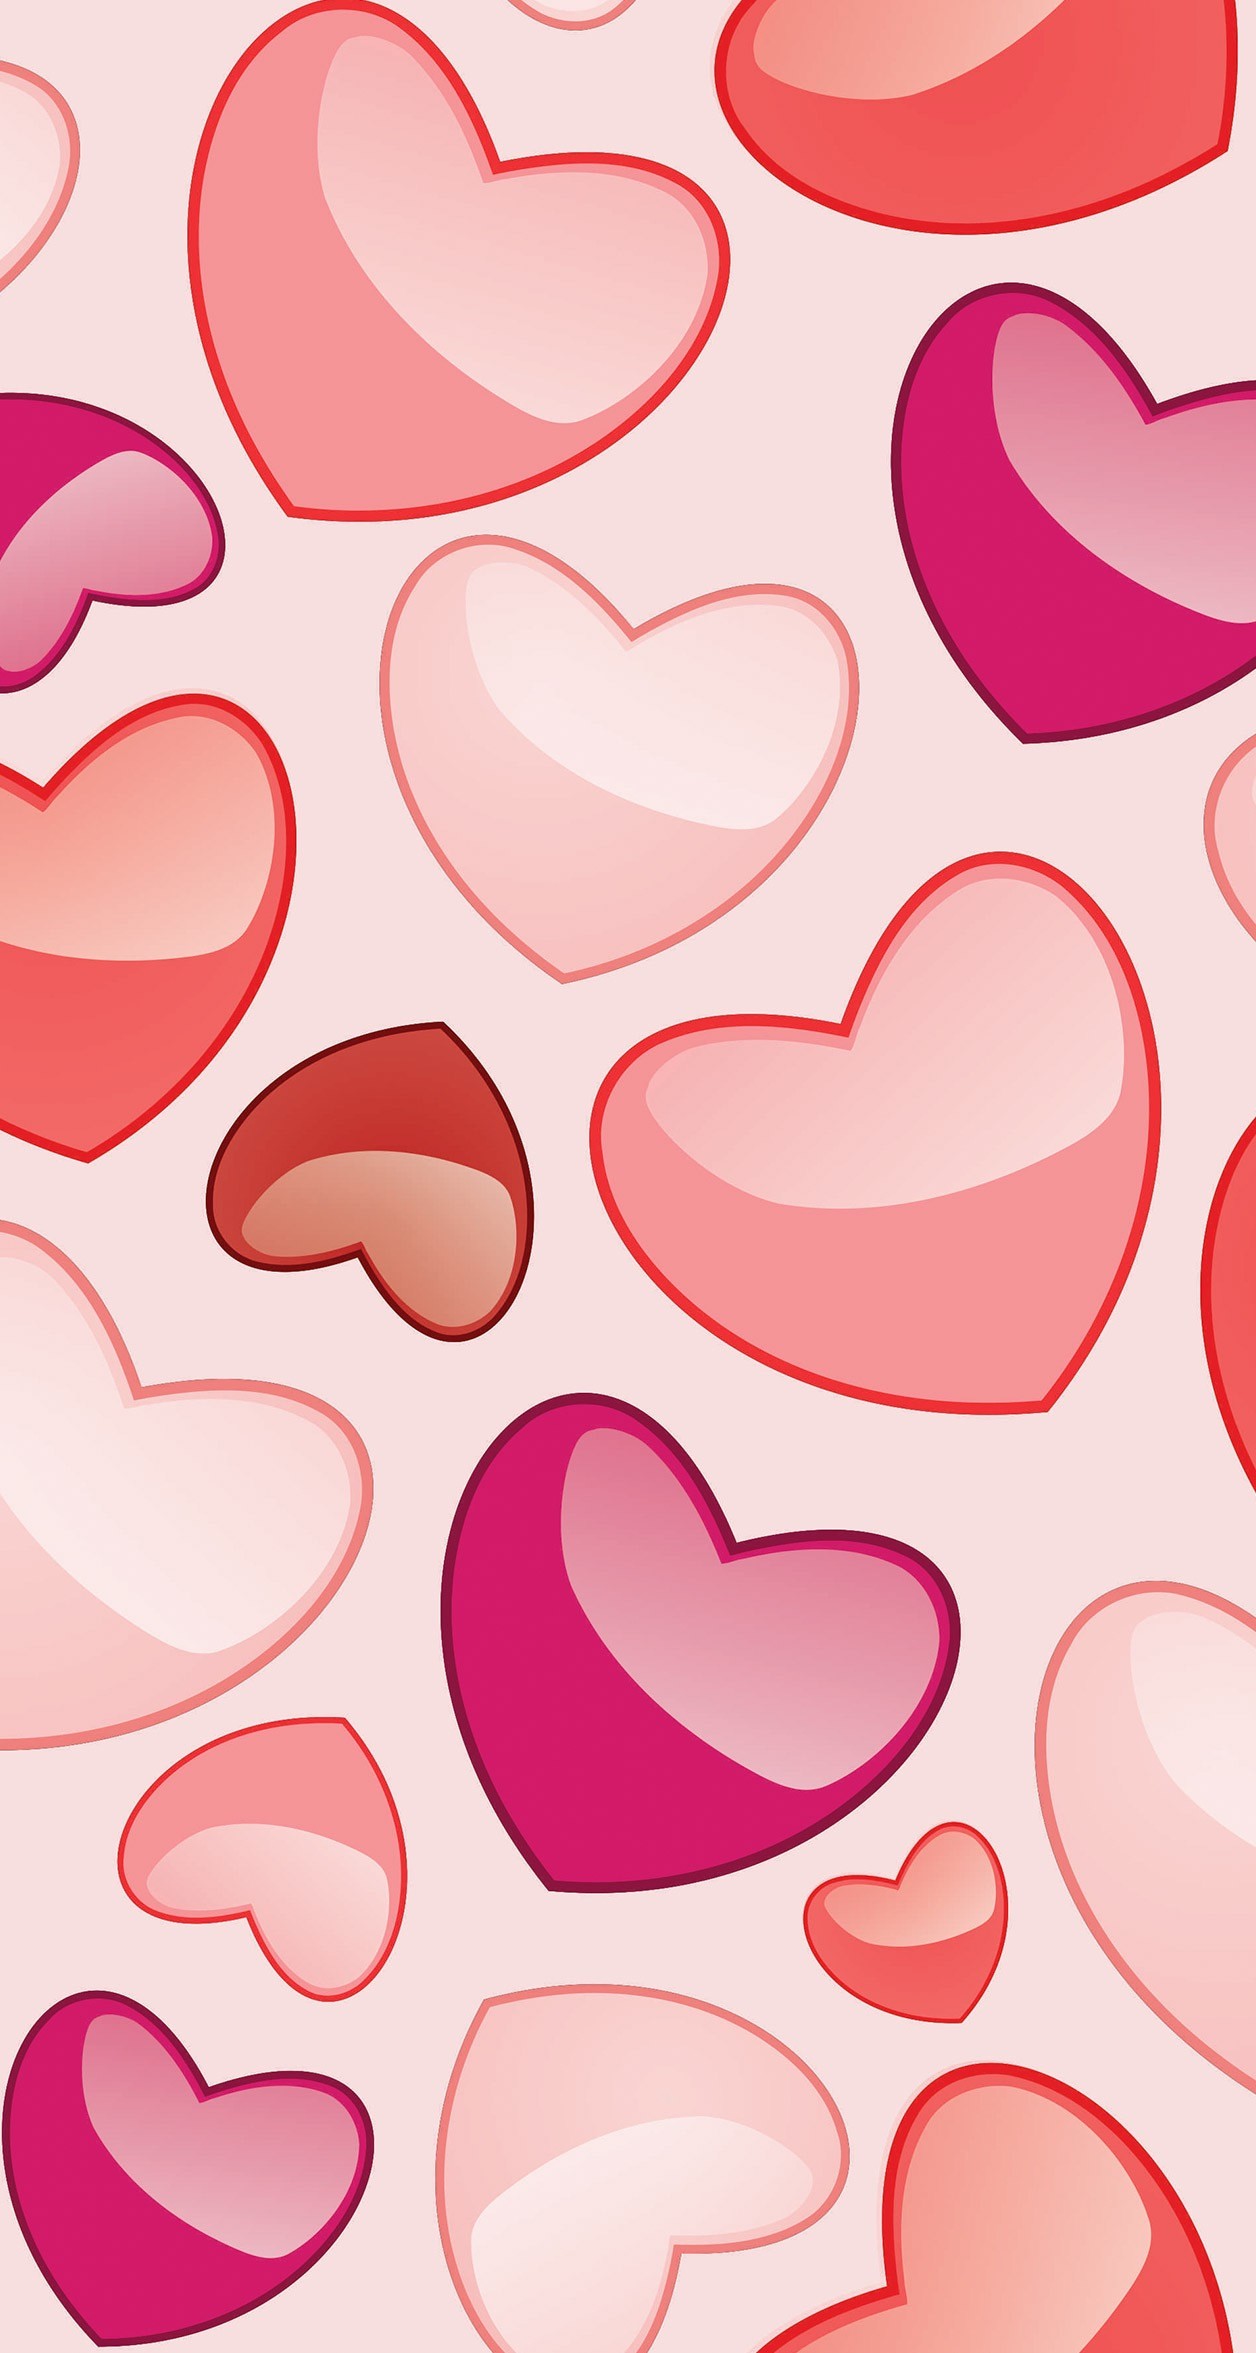 1256x2353 Heart Wallpaper, Wallpaper Backgrounds, Iphone Wallpapers, Nails, Wall,  Screen, Funds, Pink